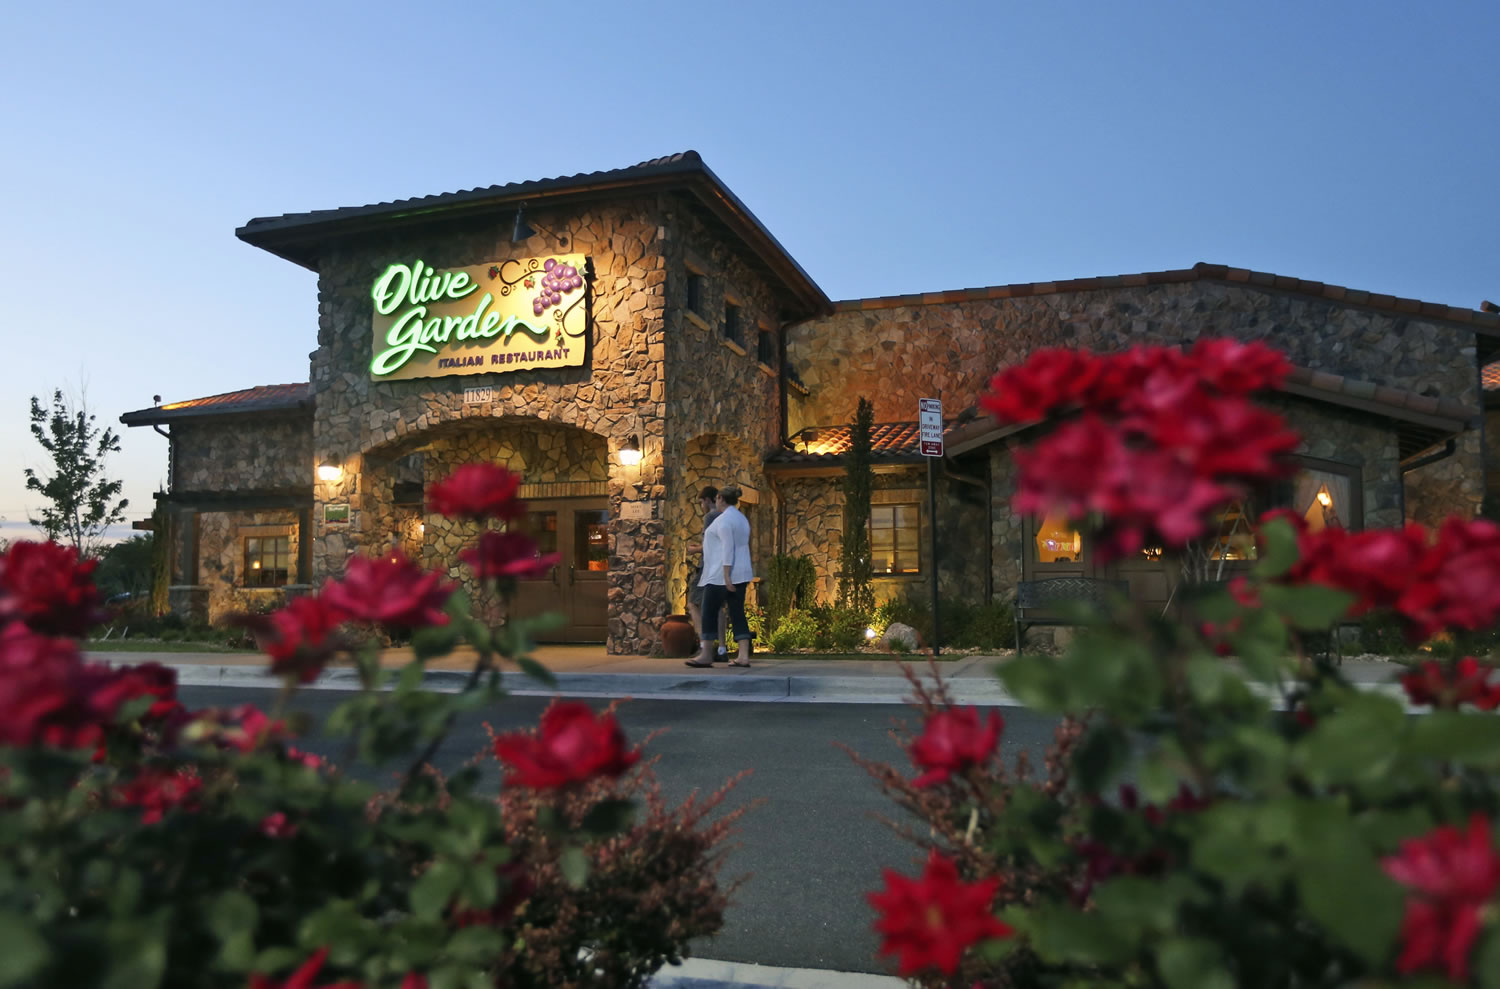 Patrons enter an Olive Garden Restaurant in Short Pump, Va. Olive Garden is hurting itself by piling on too many breadsticks, according to an investor who is disputing how the restaurant chain is run.